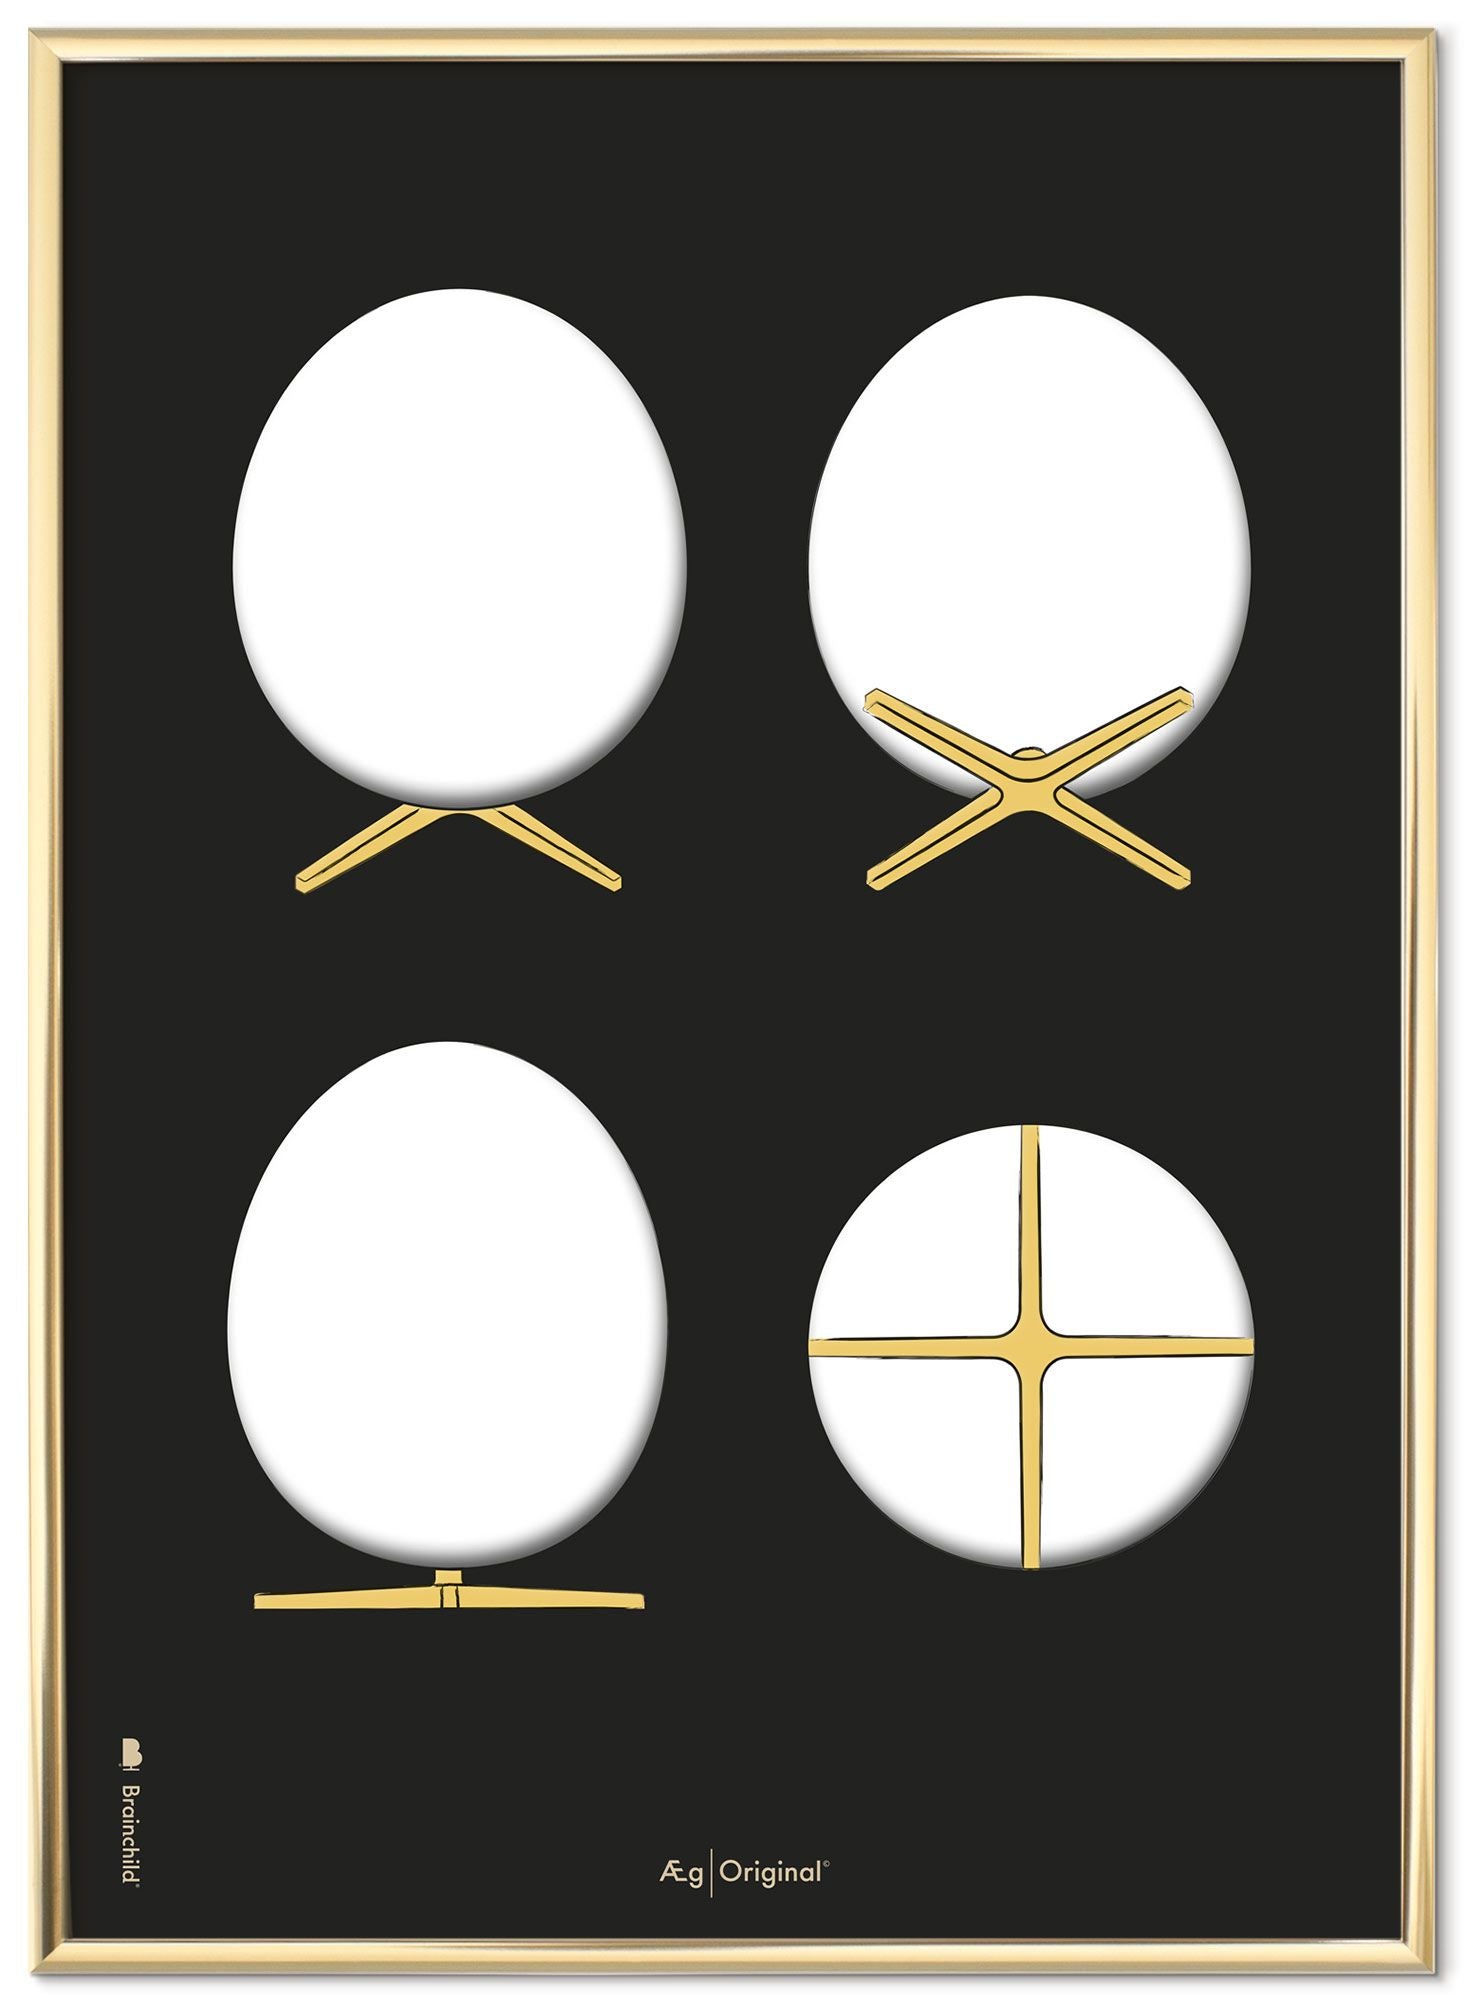 Brainchild The Egg Design Sketches Poster Frame Made Of Brass Colored Metal 50x70 Cm, Black Background